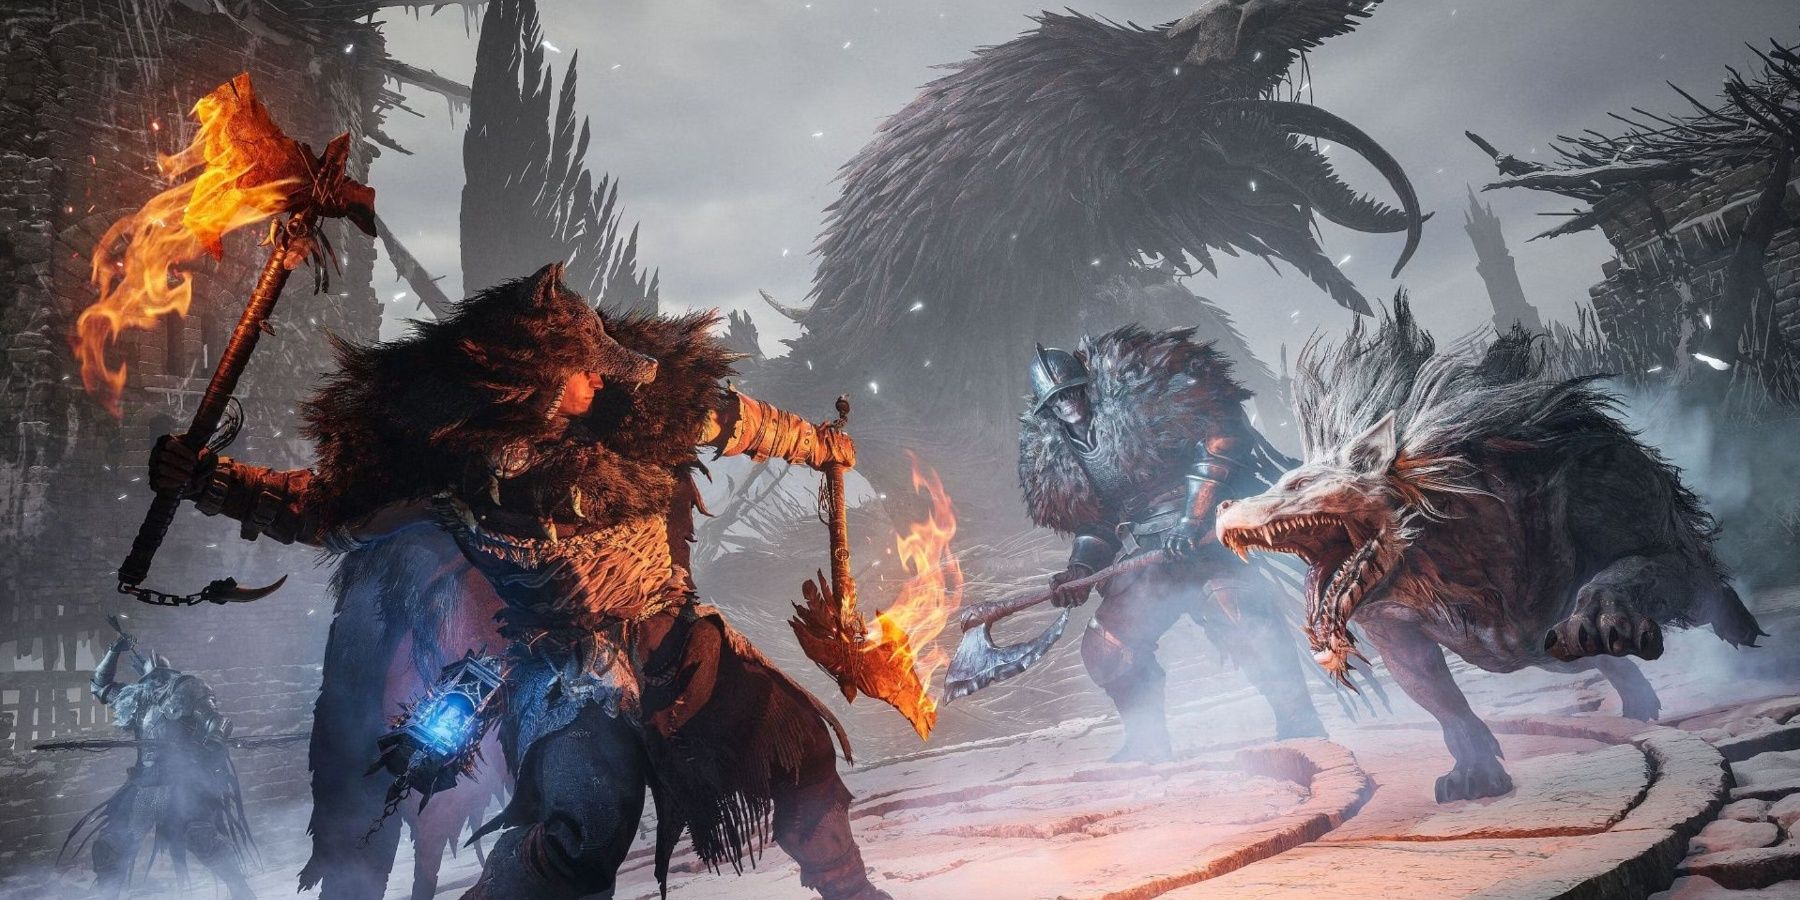 Lords of the Fallen player fighting with flaming axes